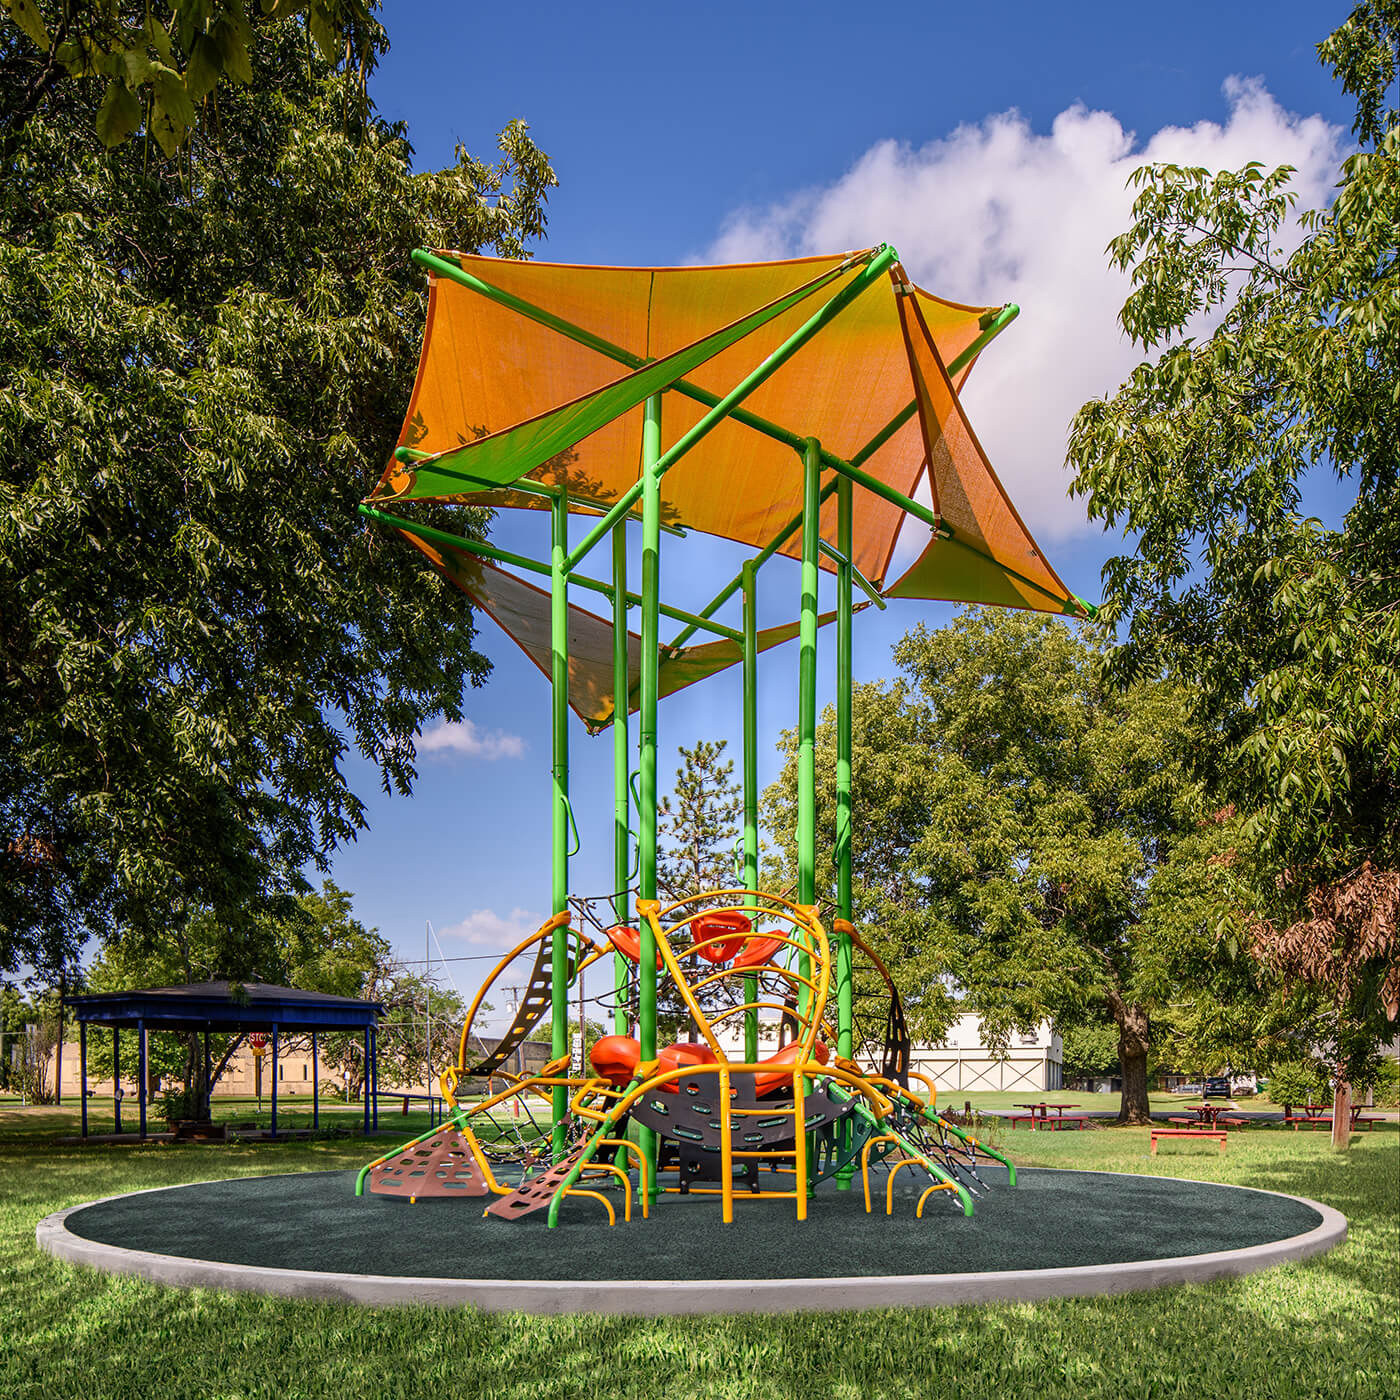 image of green and orange playground equipment with an orange overhead cover